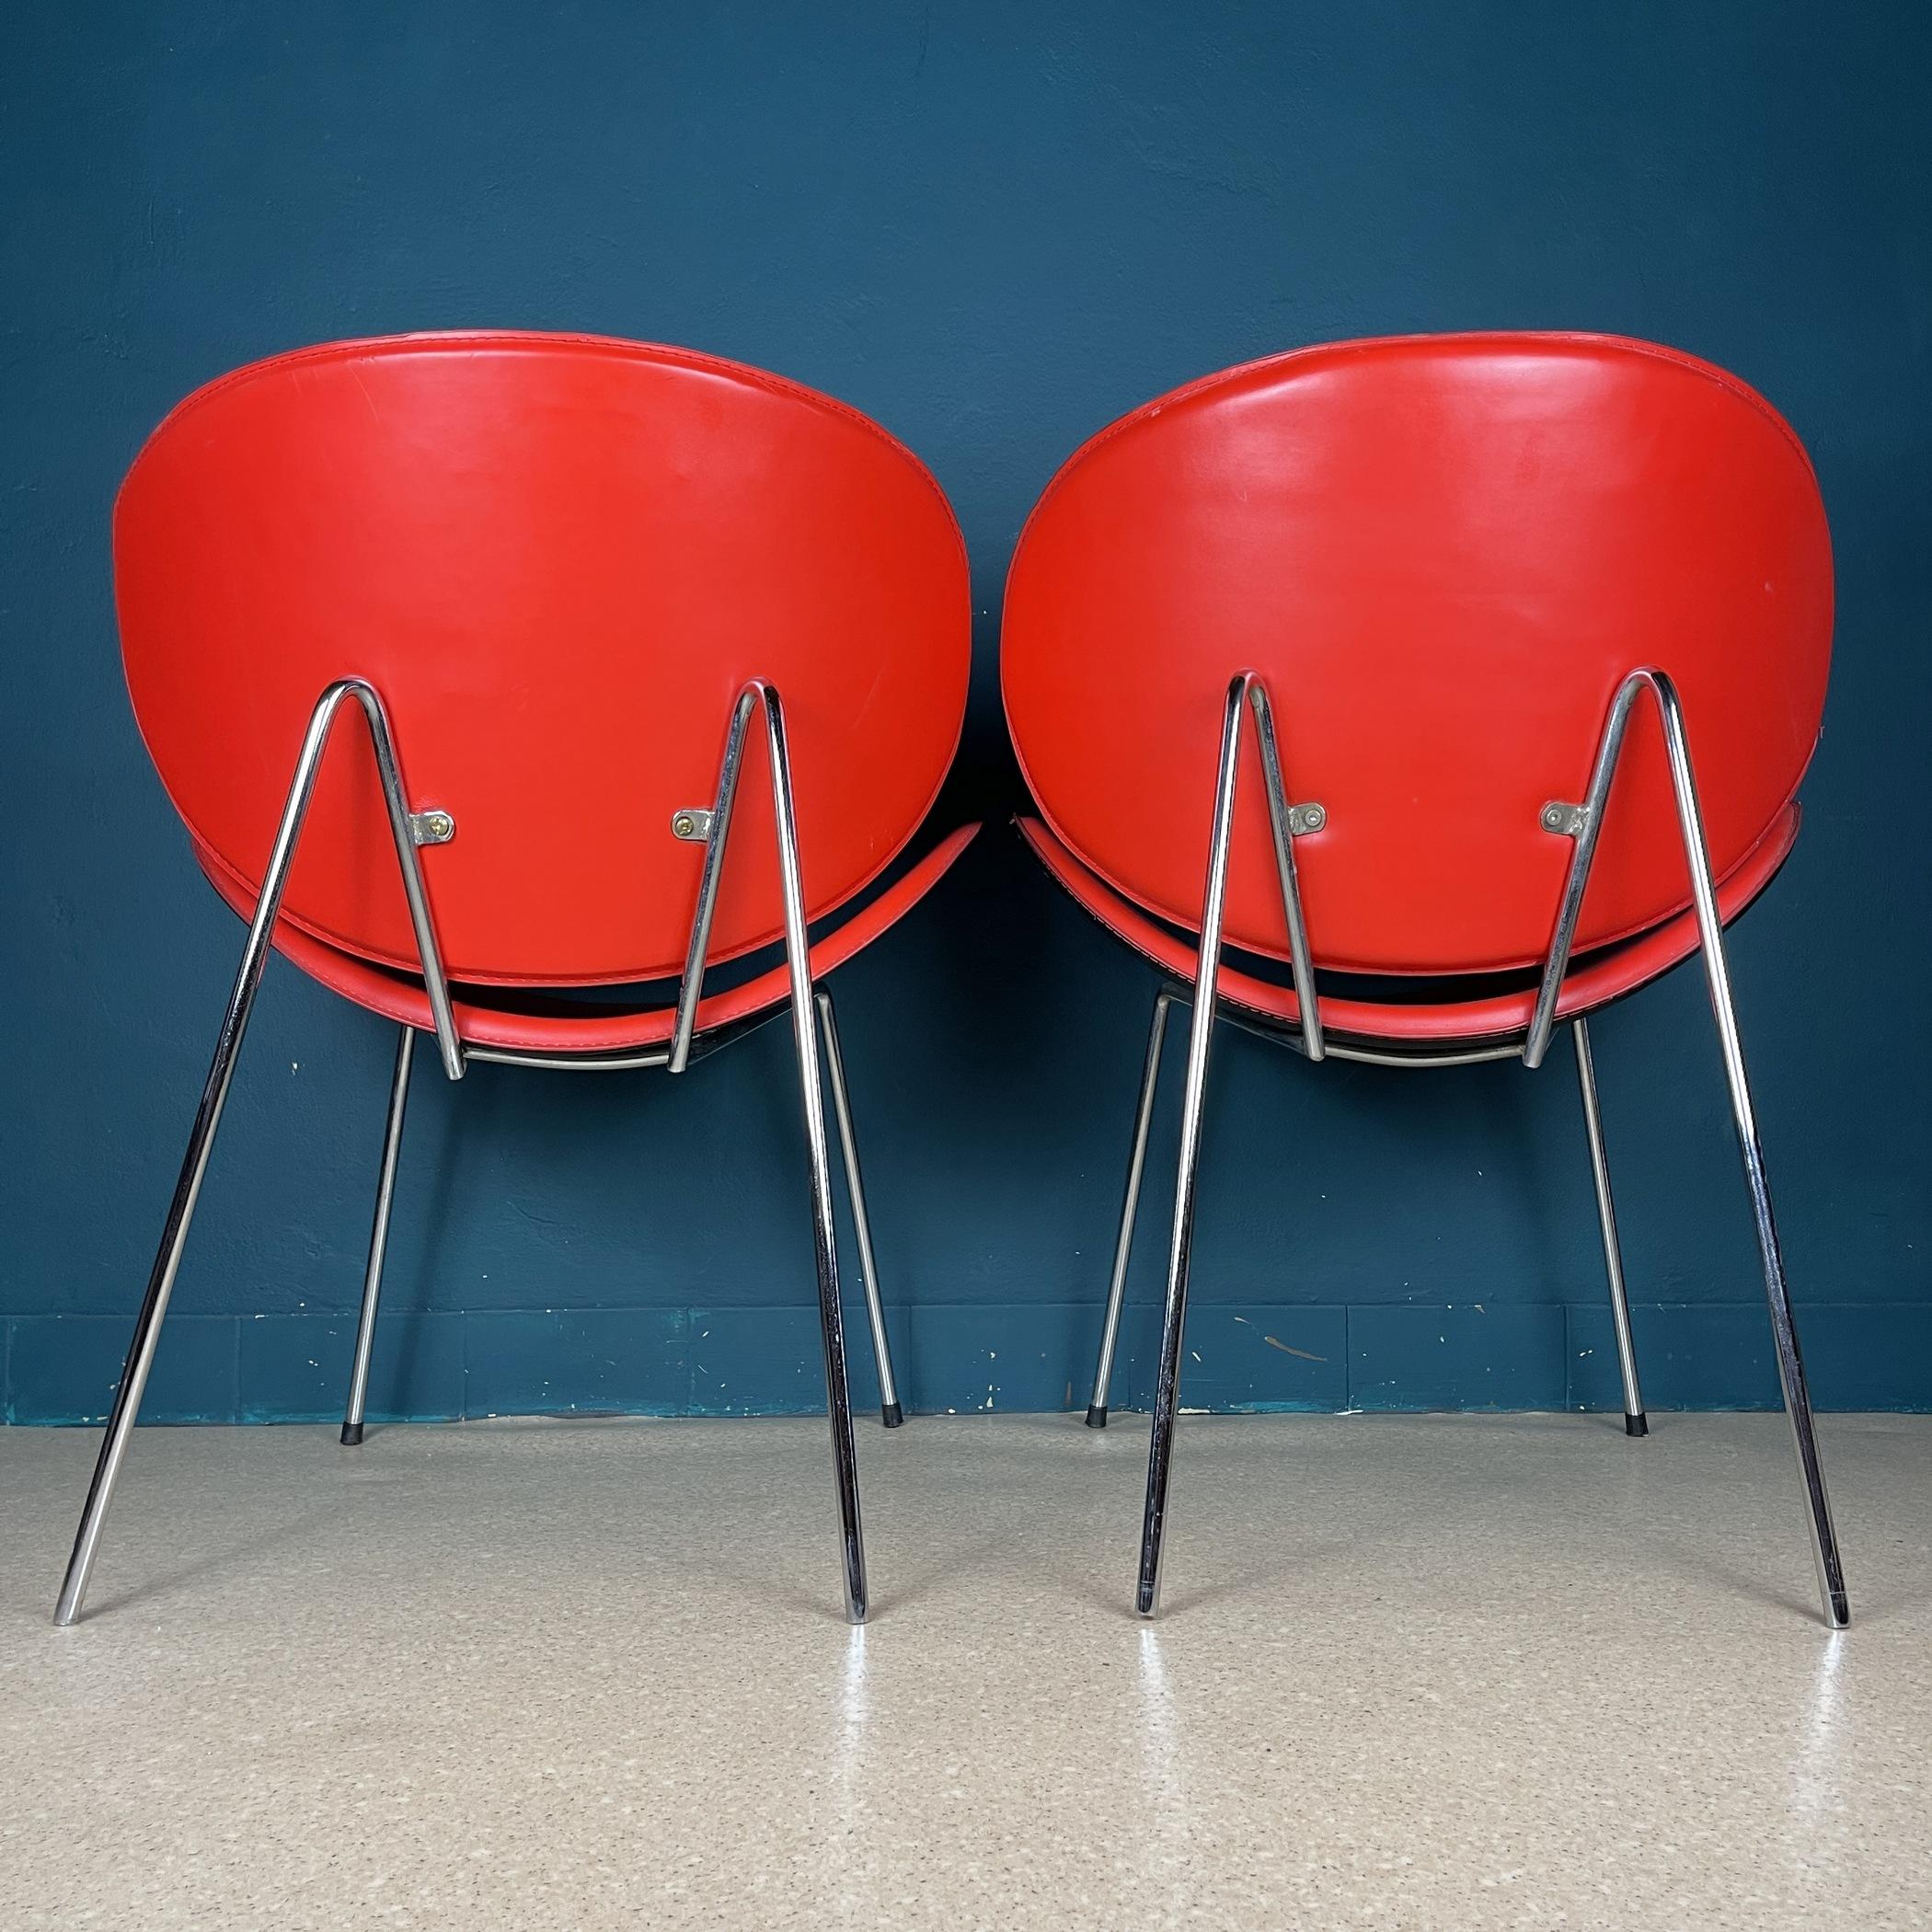 Pair of red lounge chairs Italy 1990s Design Pierre Paulin Style For Sale 4